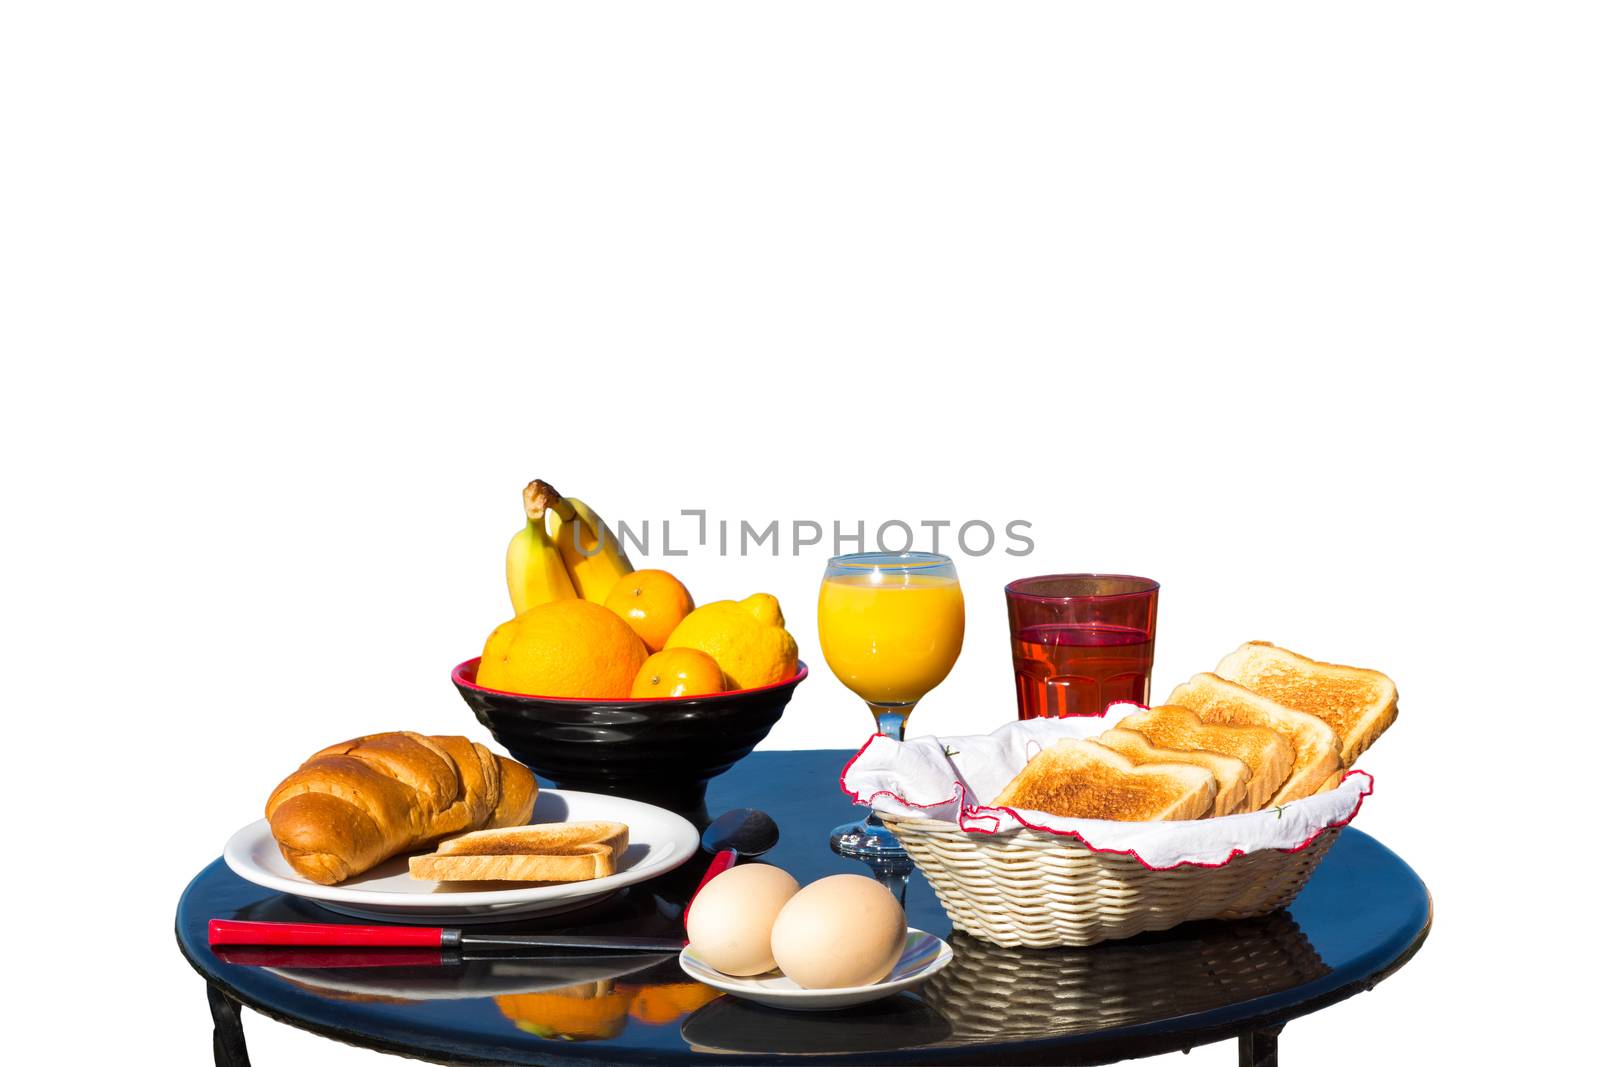 Table with food as breakfast on white background by BenSchonewille